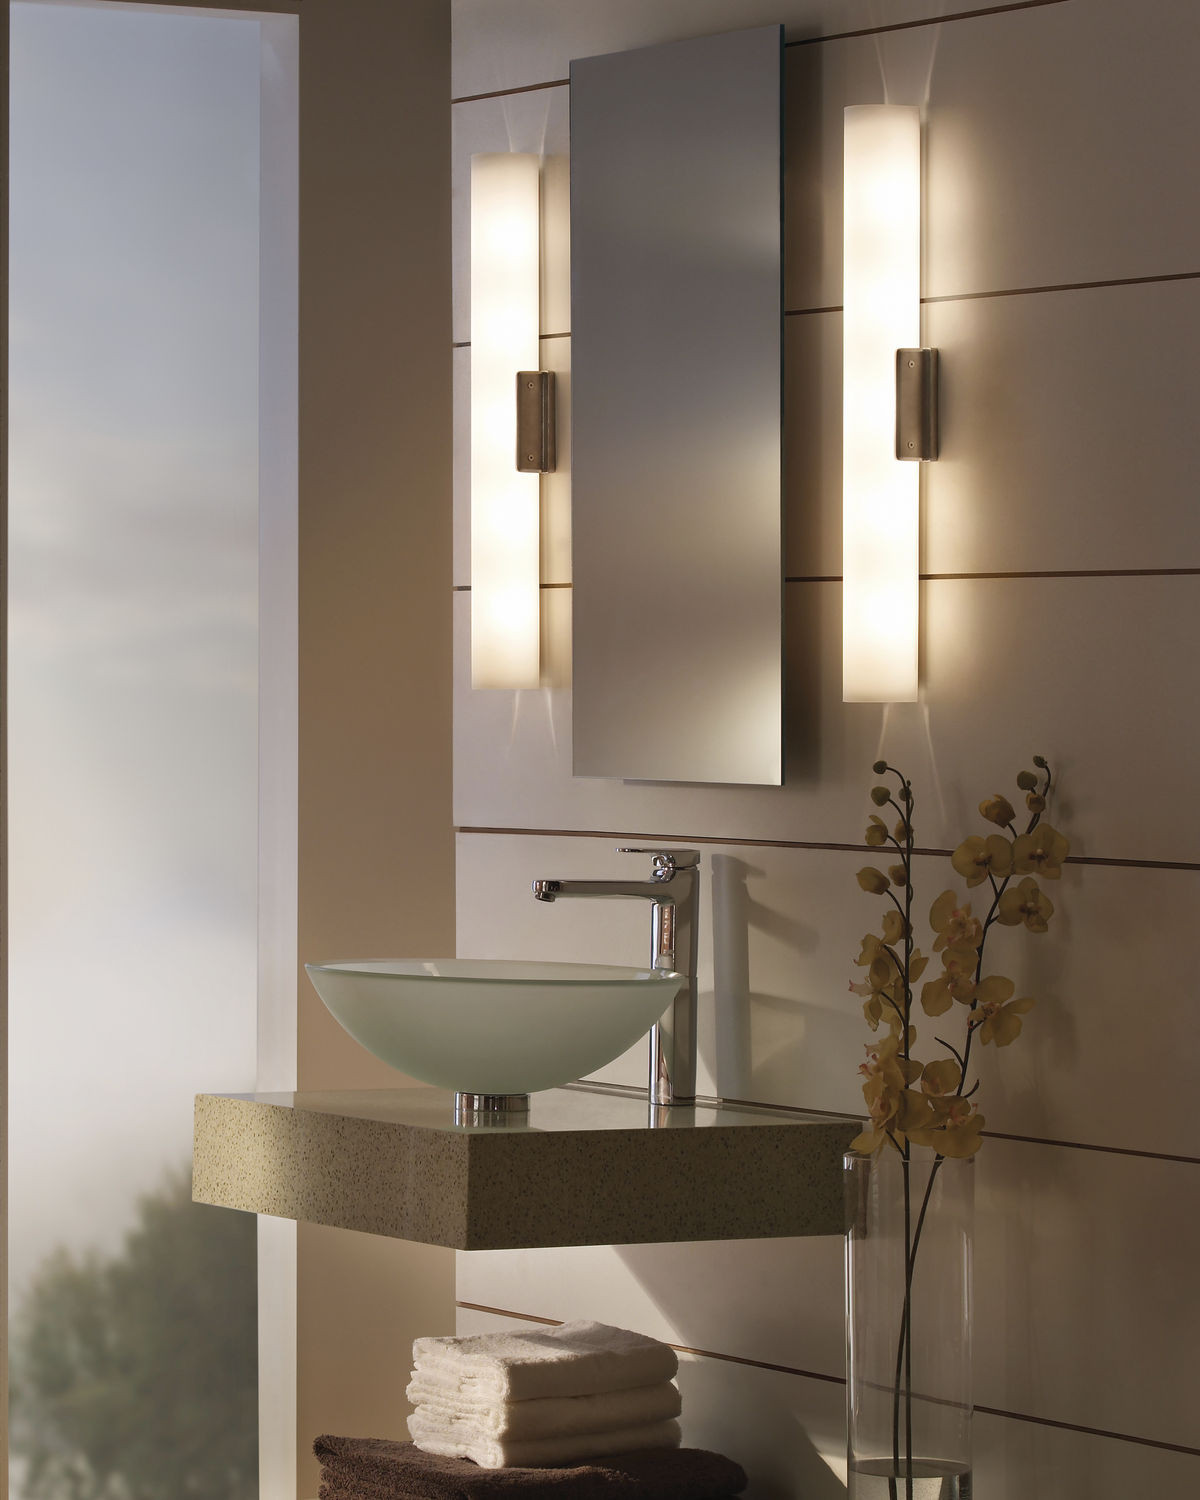 Bathroom Mirror With Light
 Interior Lighting How to Make it Work for You